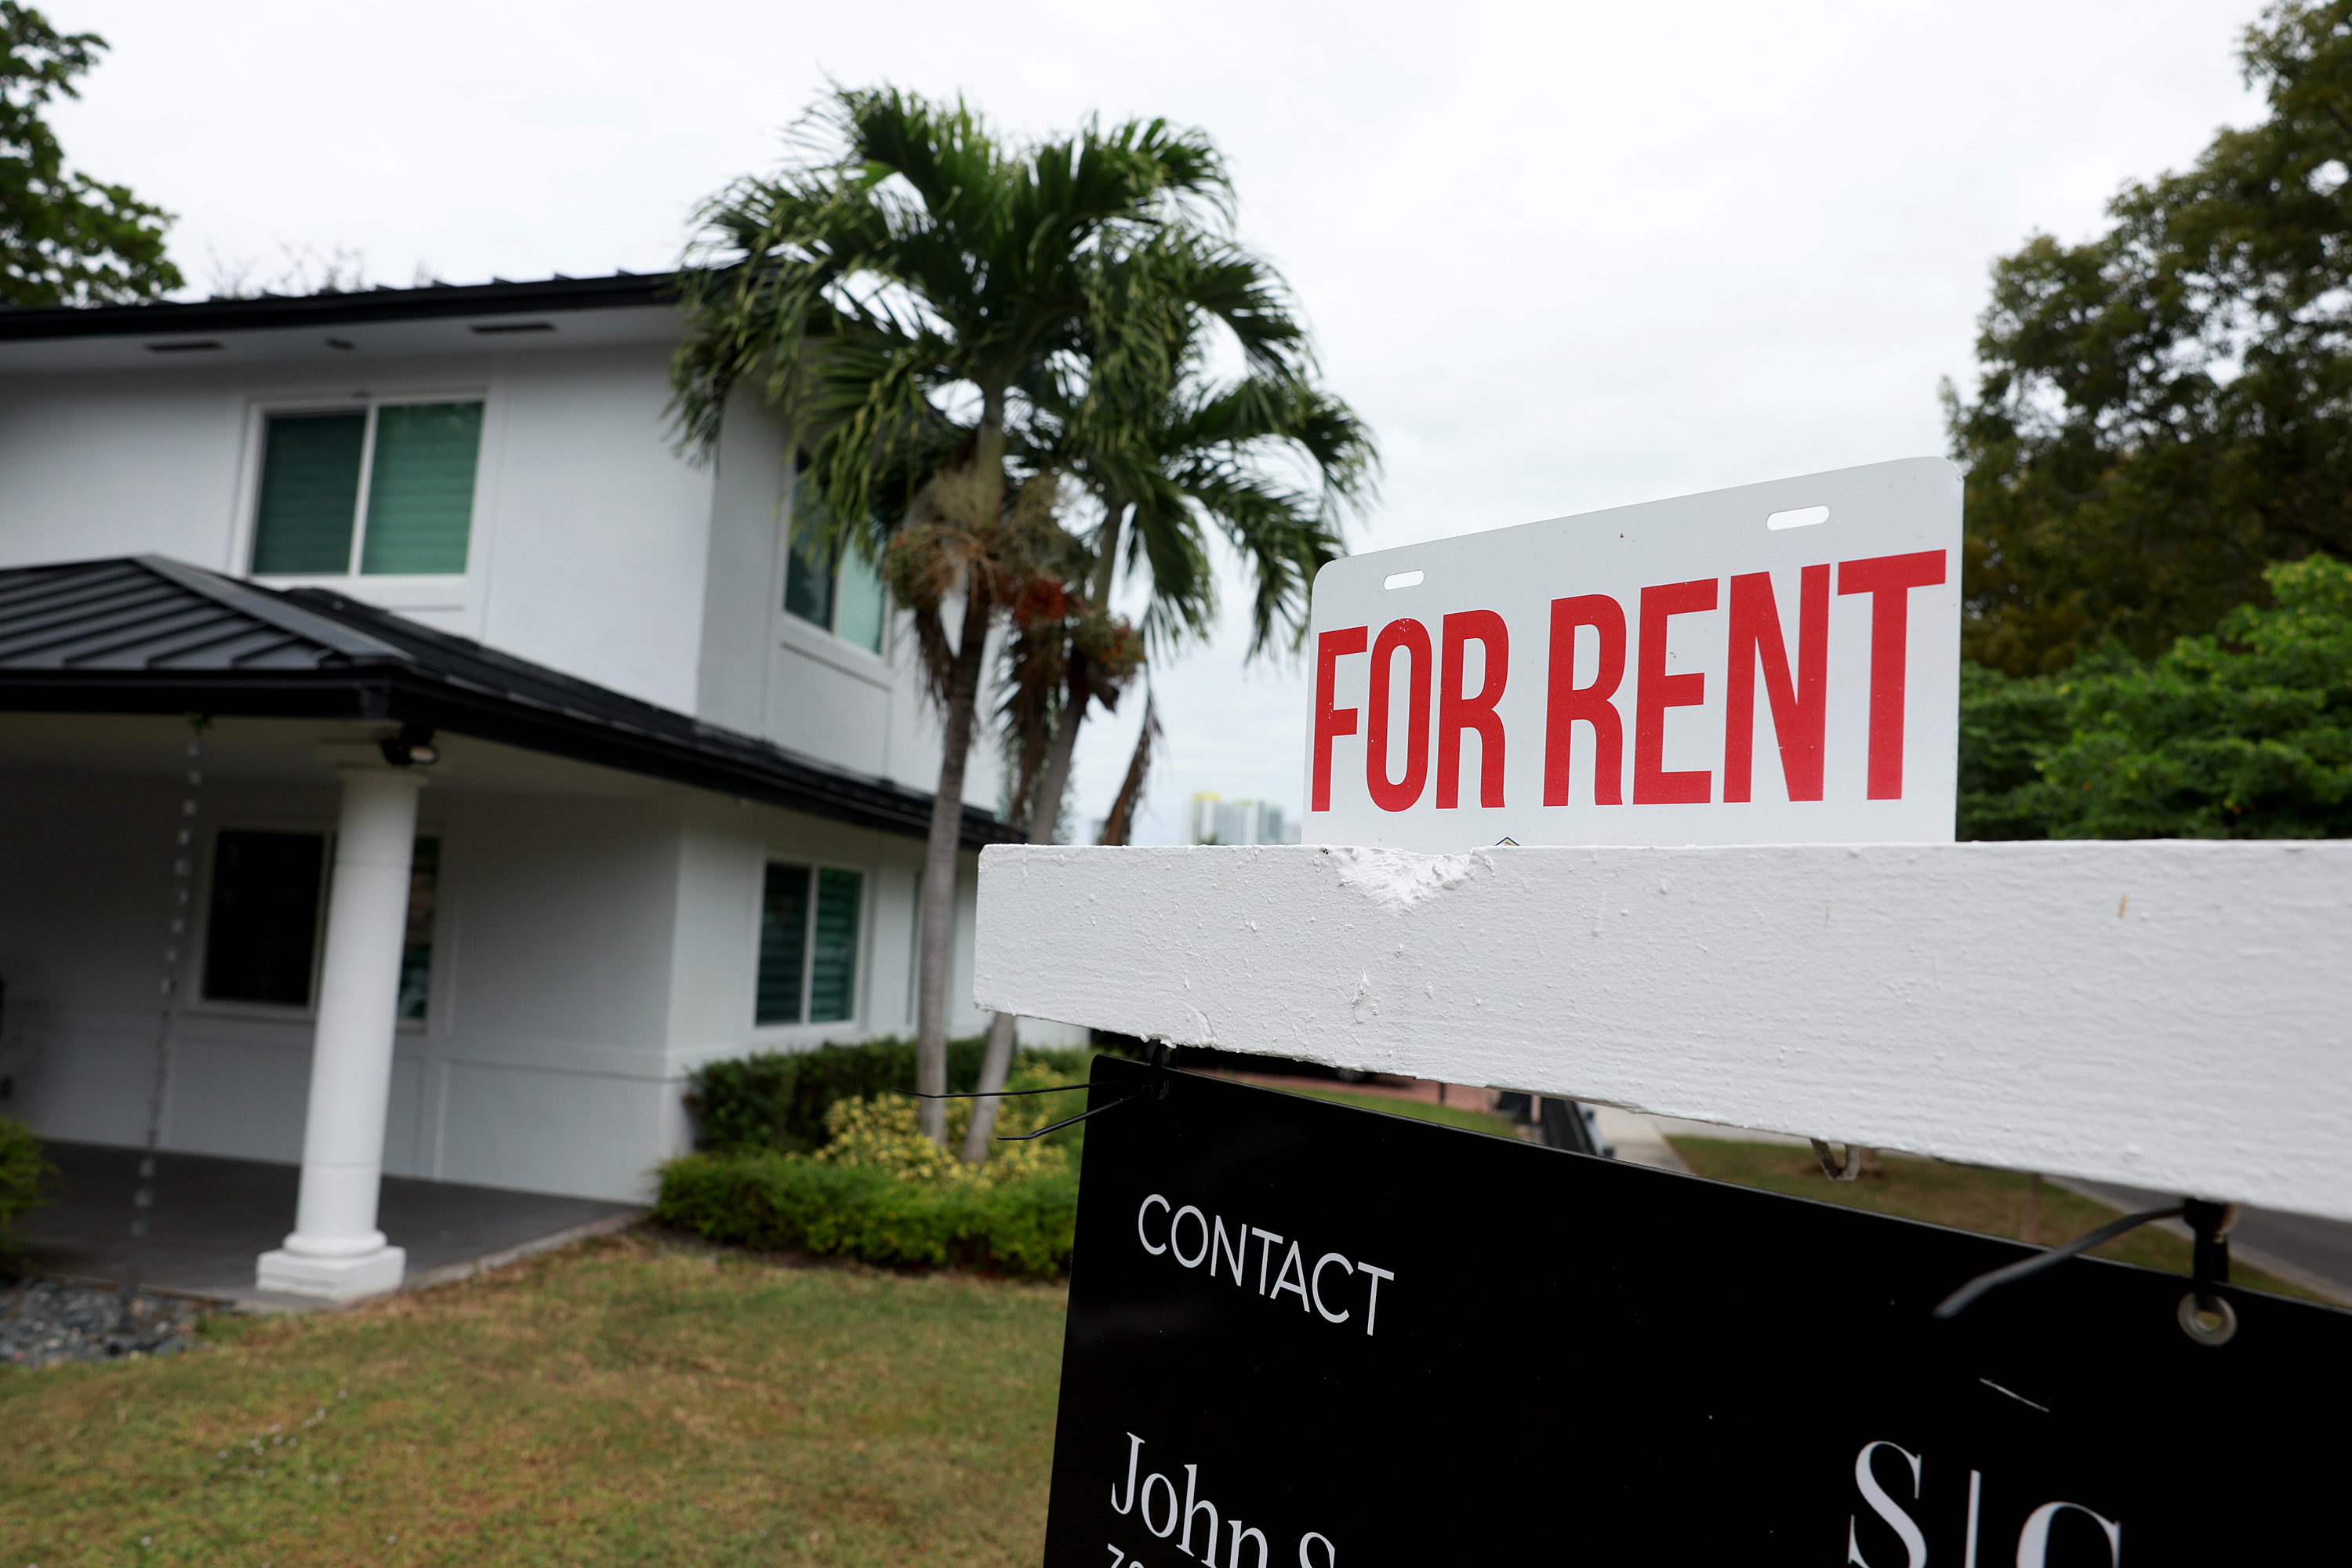 Florida homes empty as housing market tumbles in some cities